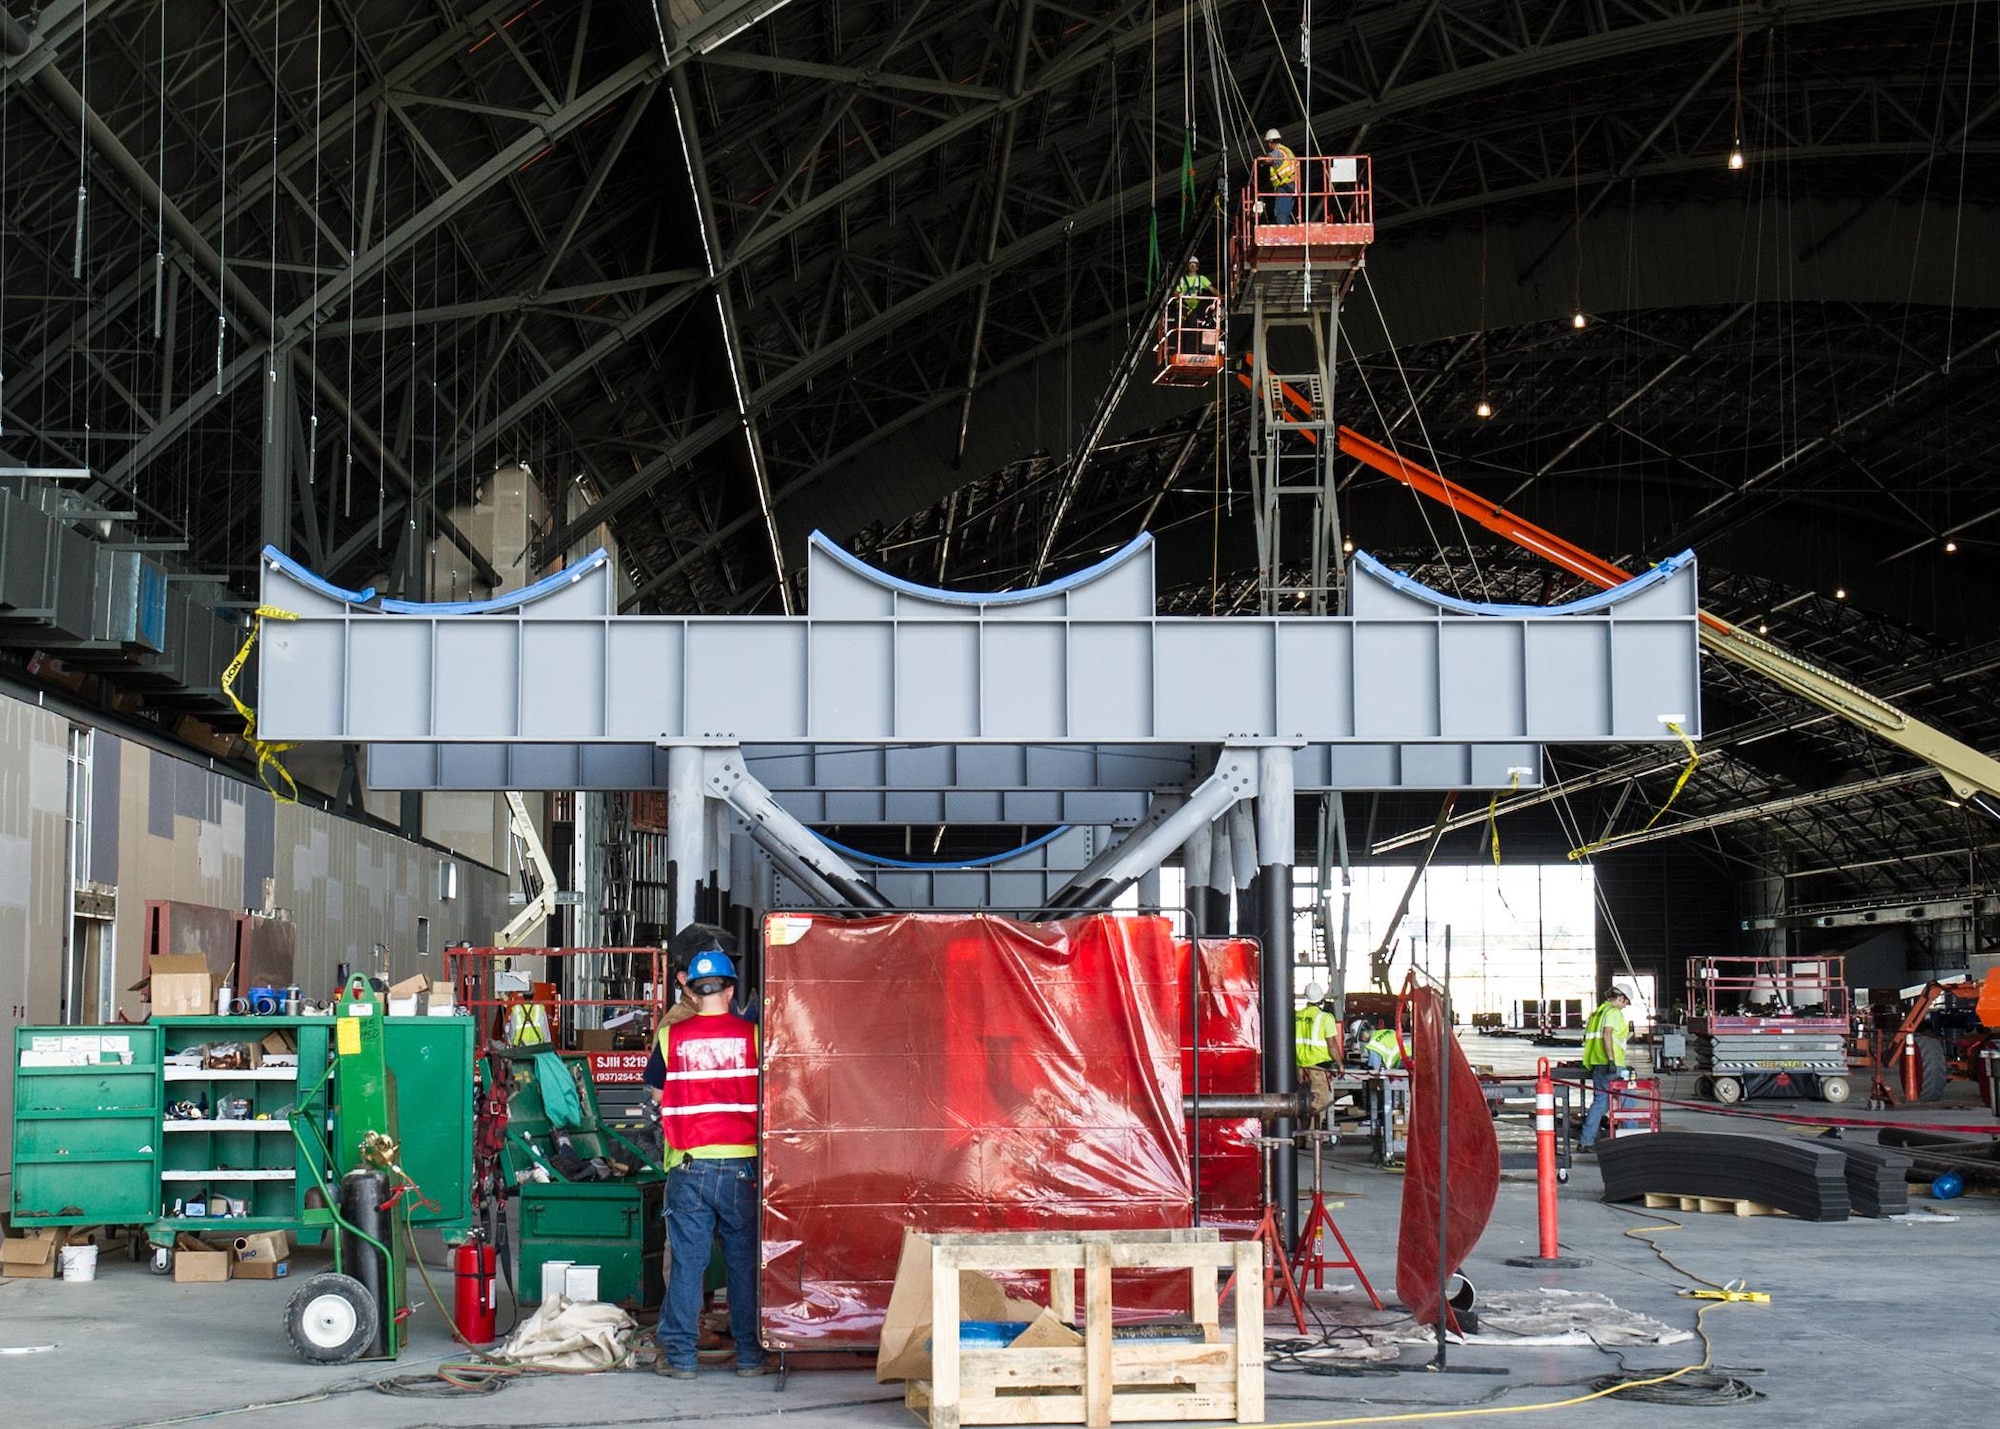 DAYTON, Ohio – Construction crew members working on the stand for the Titan 4B Space Launch Vehicle on August 20, 2015, in Dayton, Ohio. The 224,000 square foot building, which is scheduled to open to the public in 2016, is being privately financed by the Air Force Museum Foundation, a non-profit organization chartered to assist in the development and expansion of the museum's facilities. (U.S. Air Force photo)